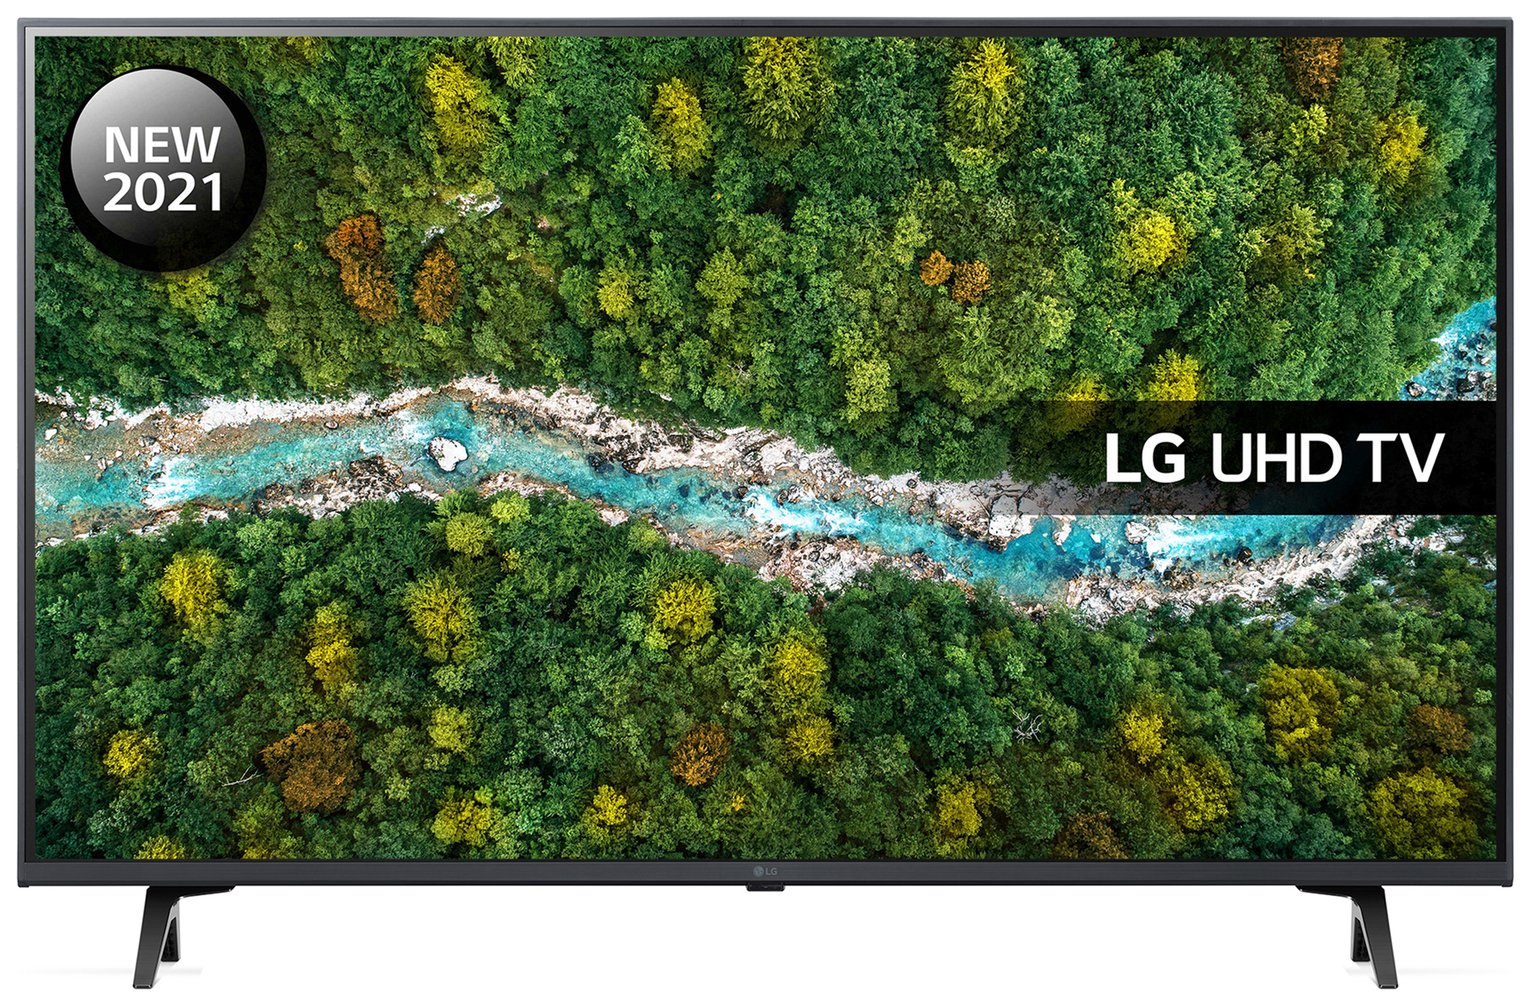 LG 55 Inch 55UP77006LB Smart 4K UHD LED HDR Freeview TV